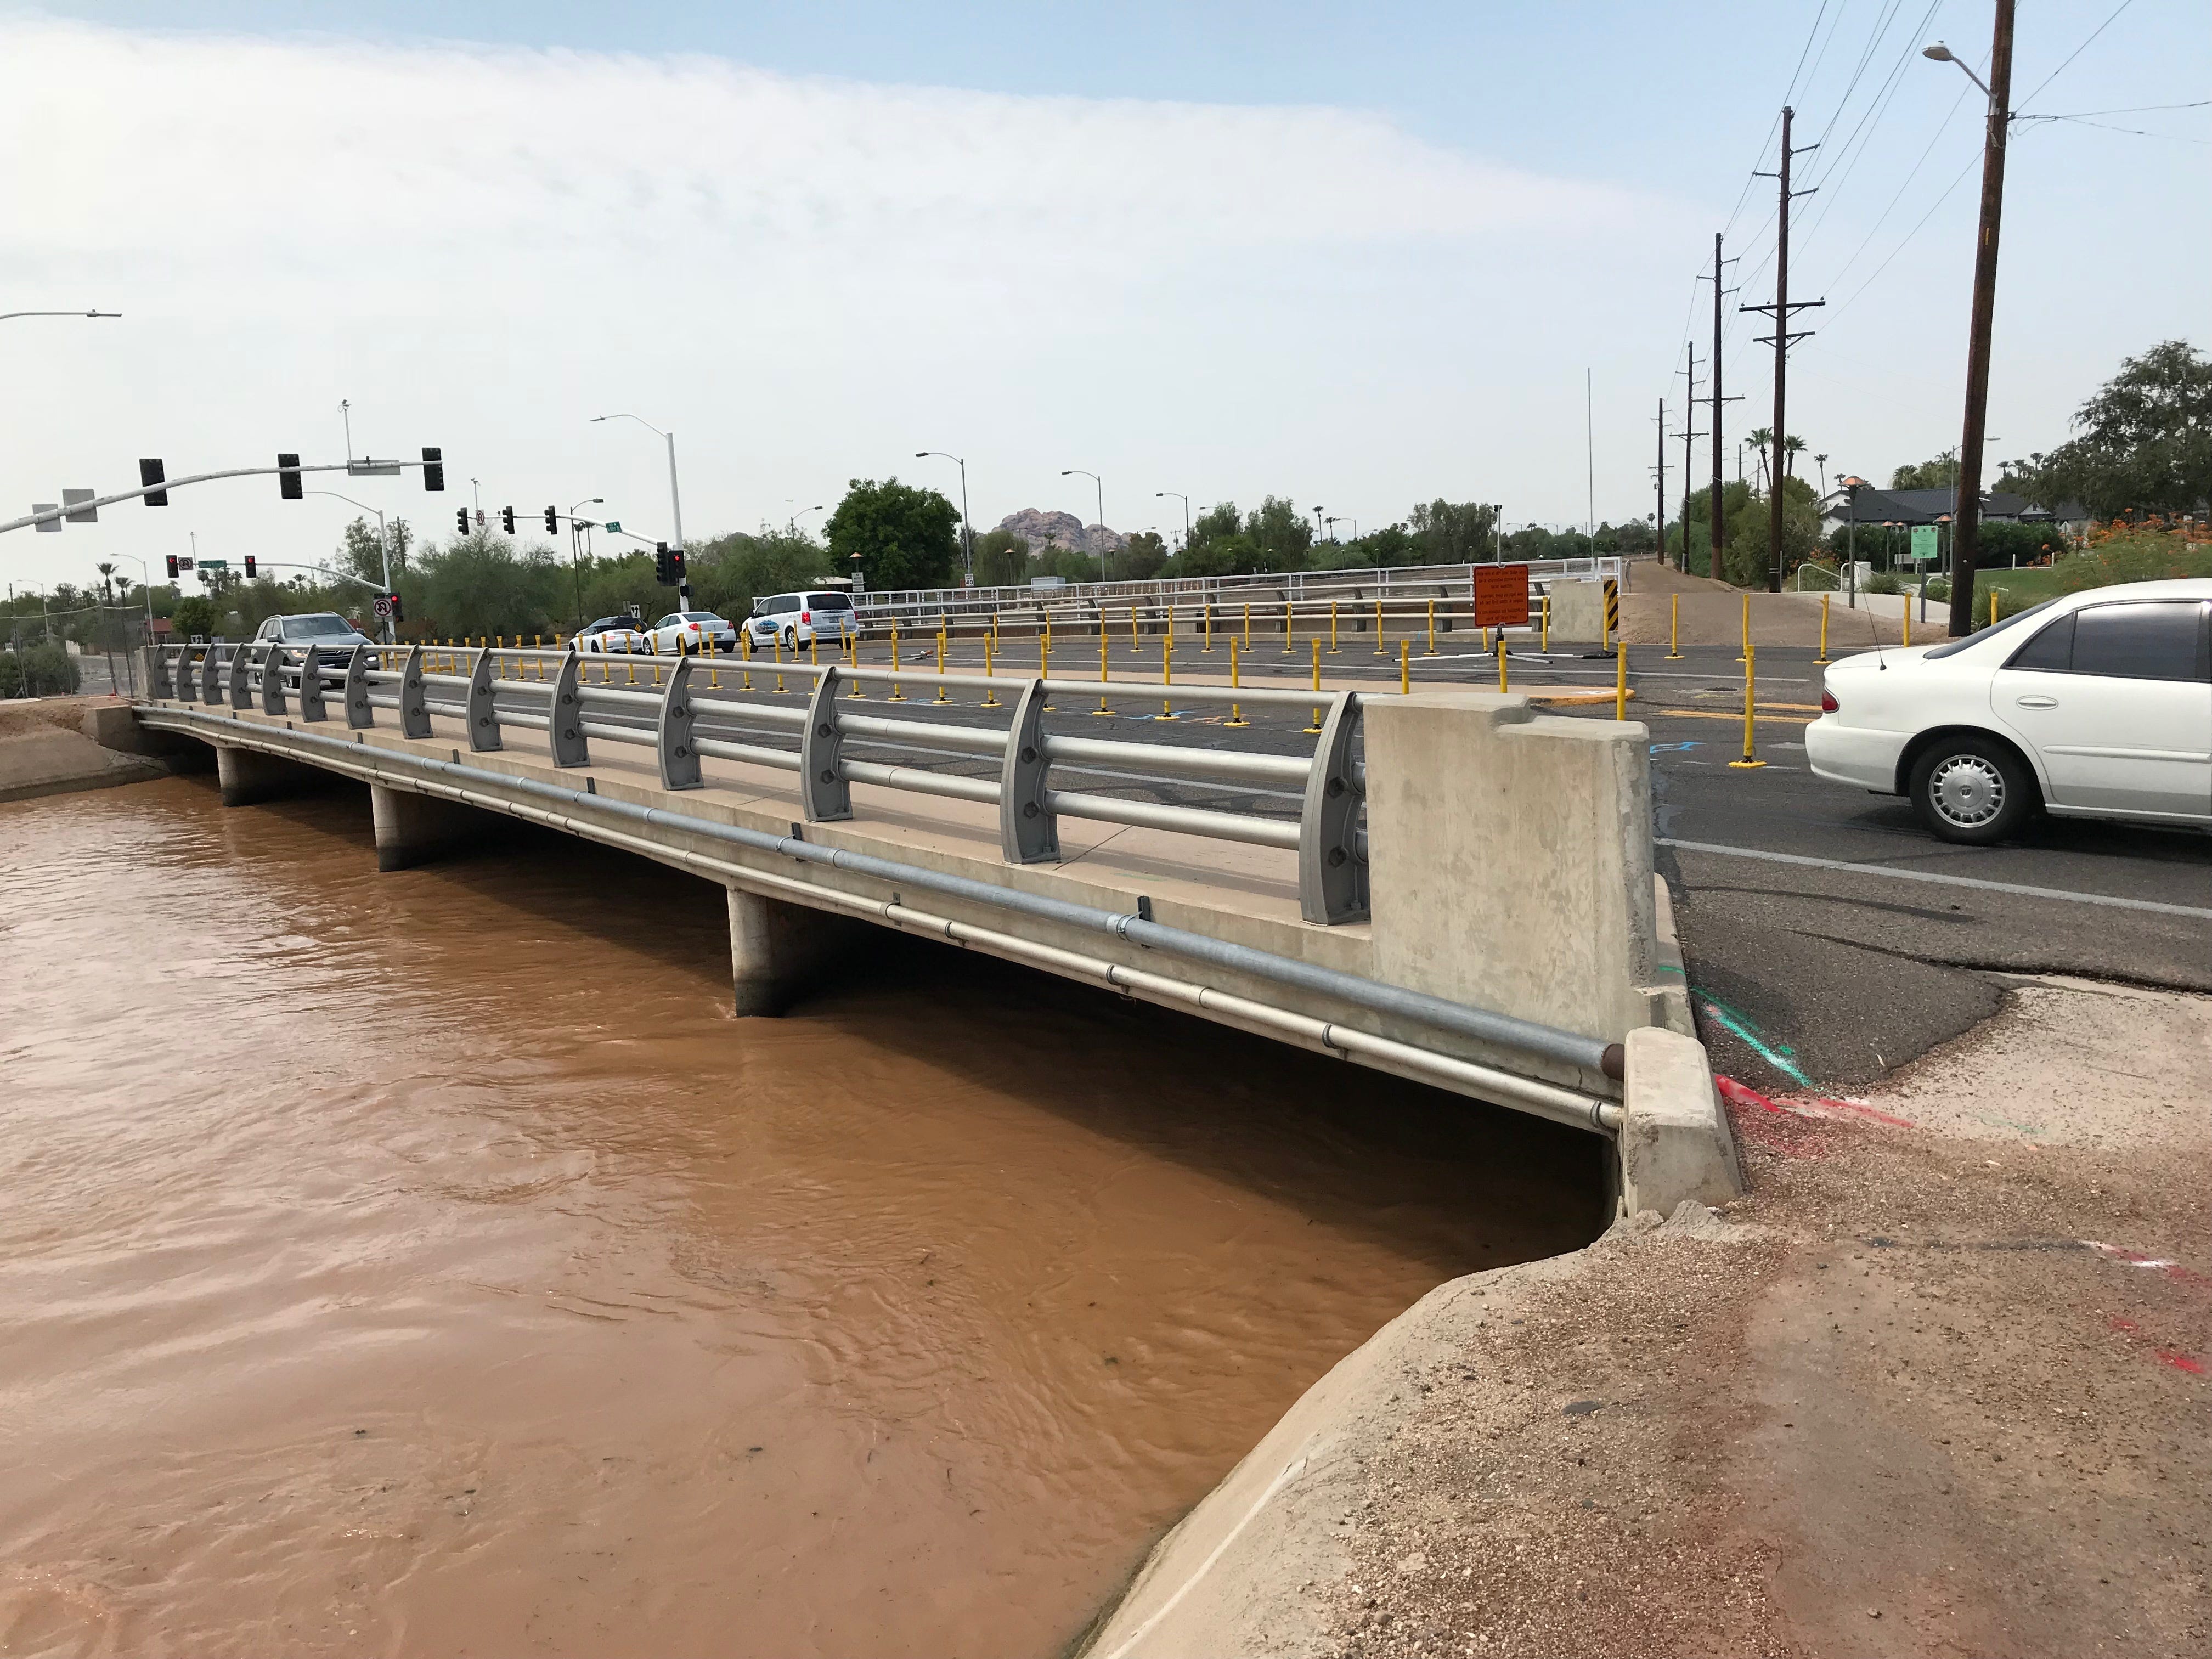 Scottsdale to pay $13.2 million for two emergency bridge repairs in Old Town